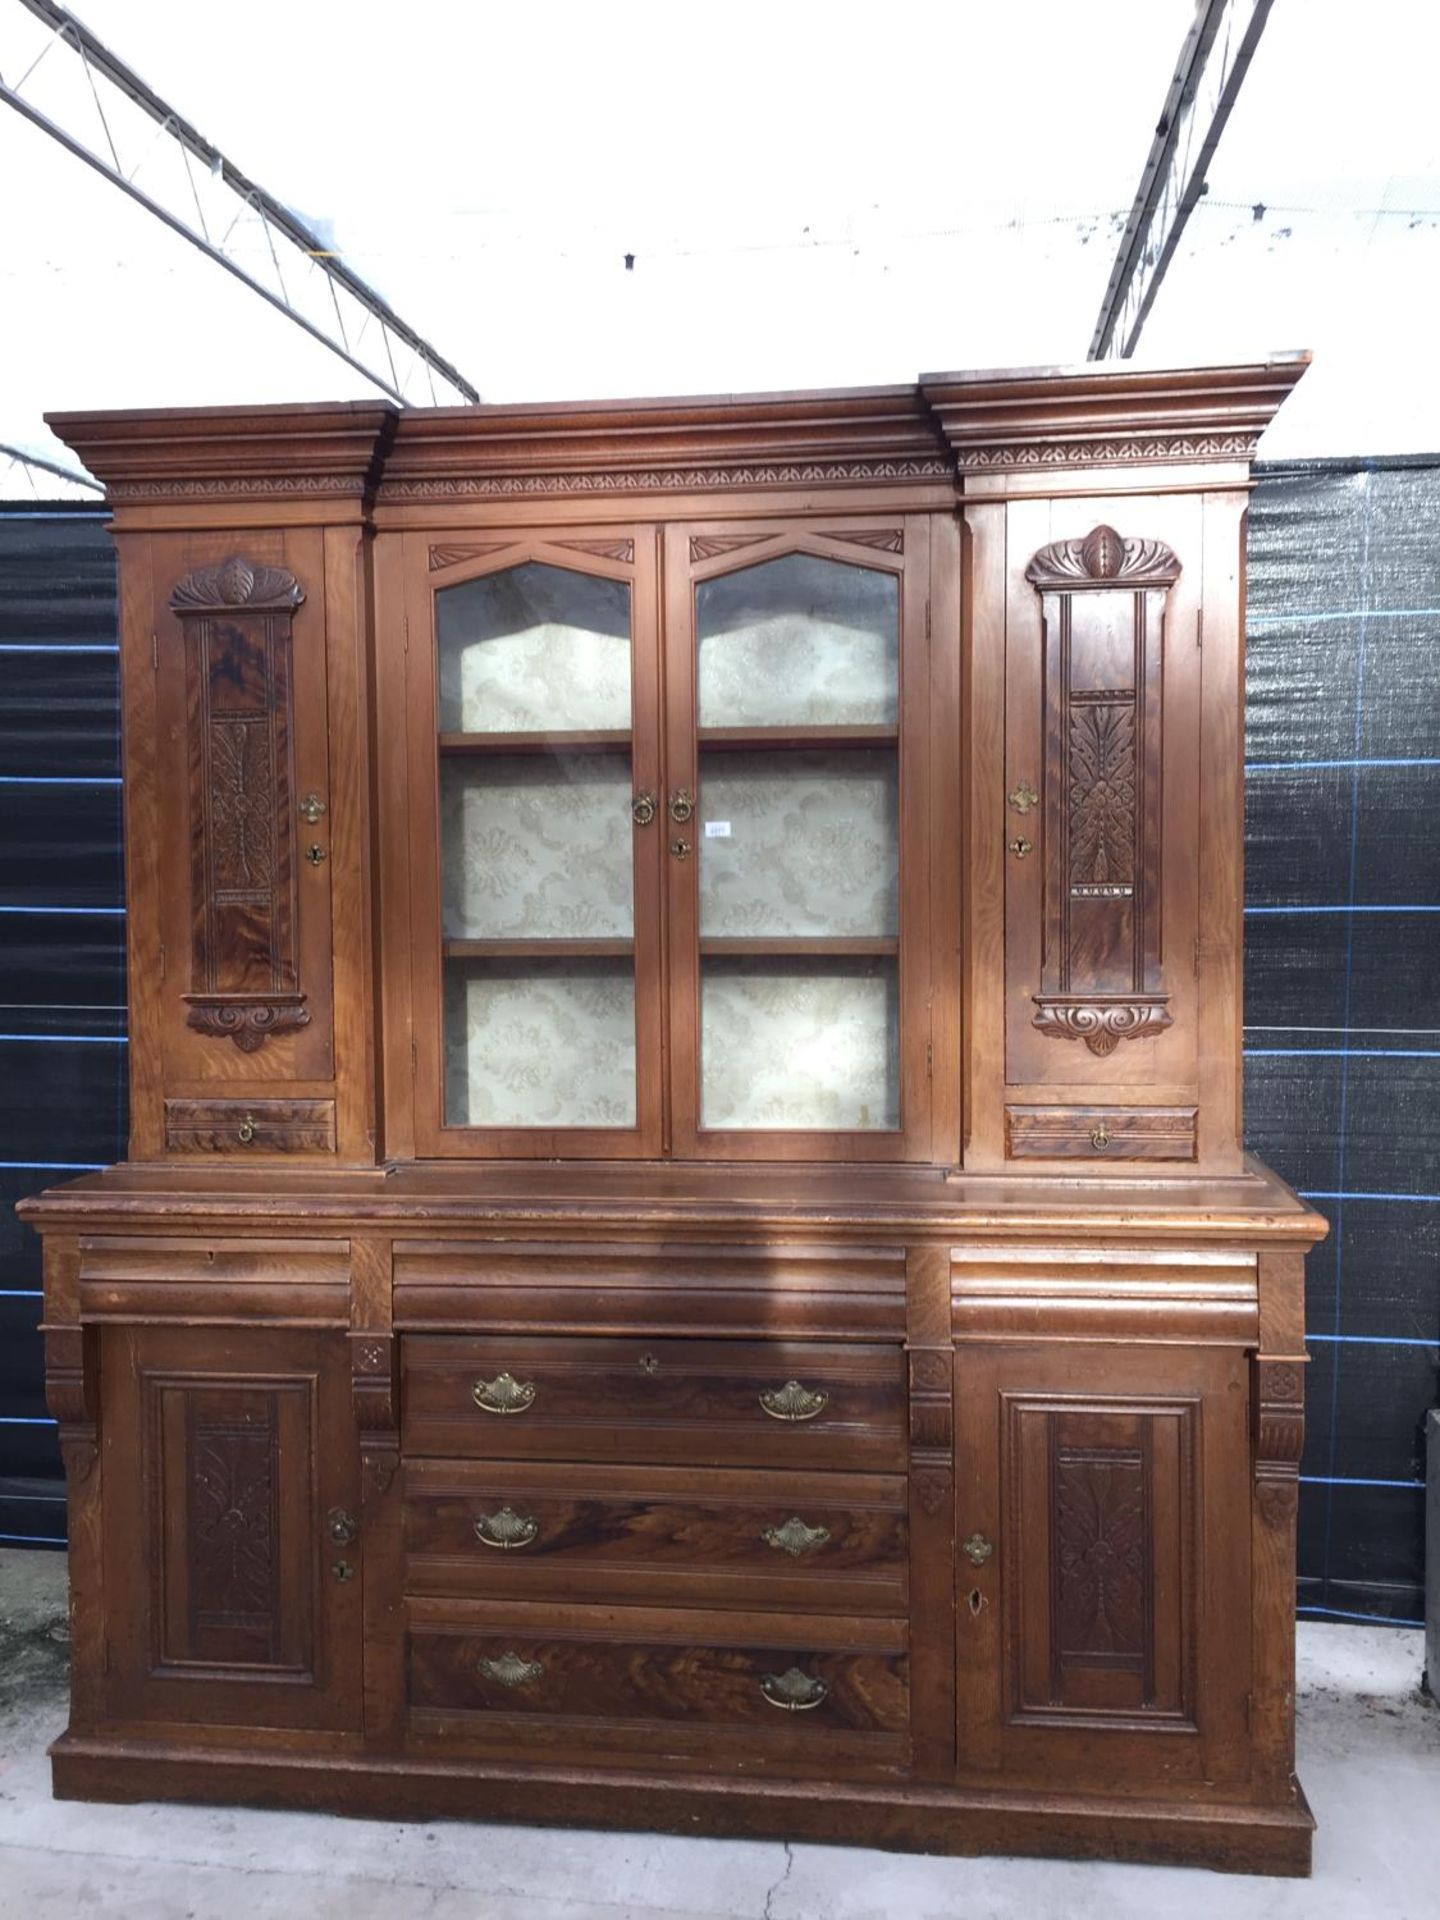 A VICTORIAN SCUMBLED PINE DRESSER, 74" WIDE, WITH INVERTED BREAKFRONT UPPER PORTION, HAVING PANELLED